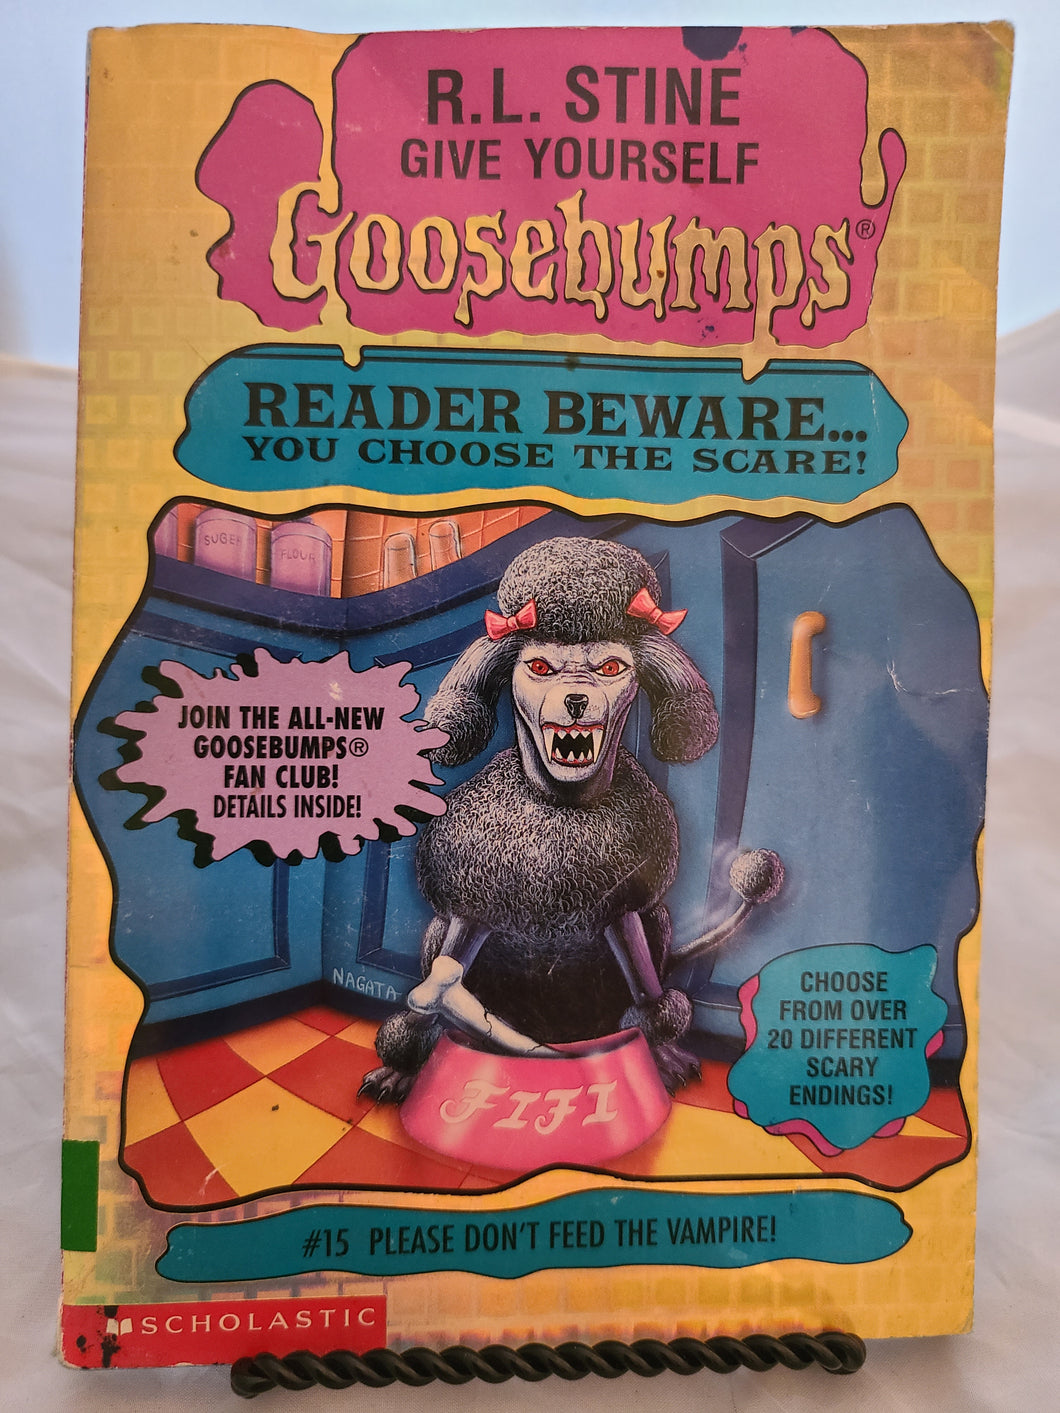 Give Yourself Goosebumps #15 - Please Don't Feed The Vampire!